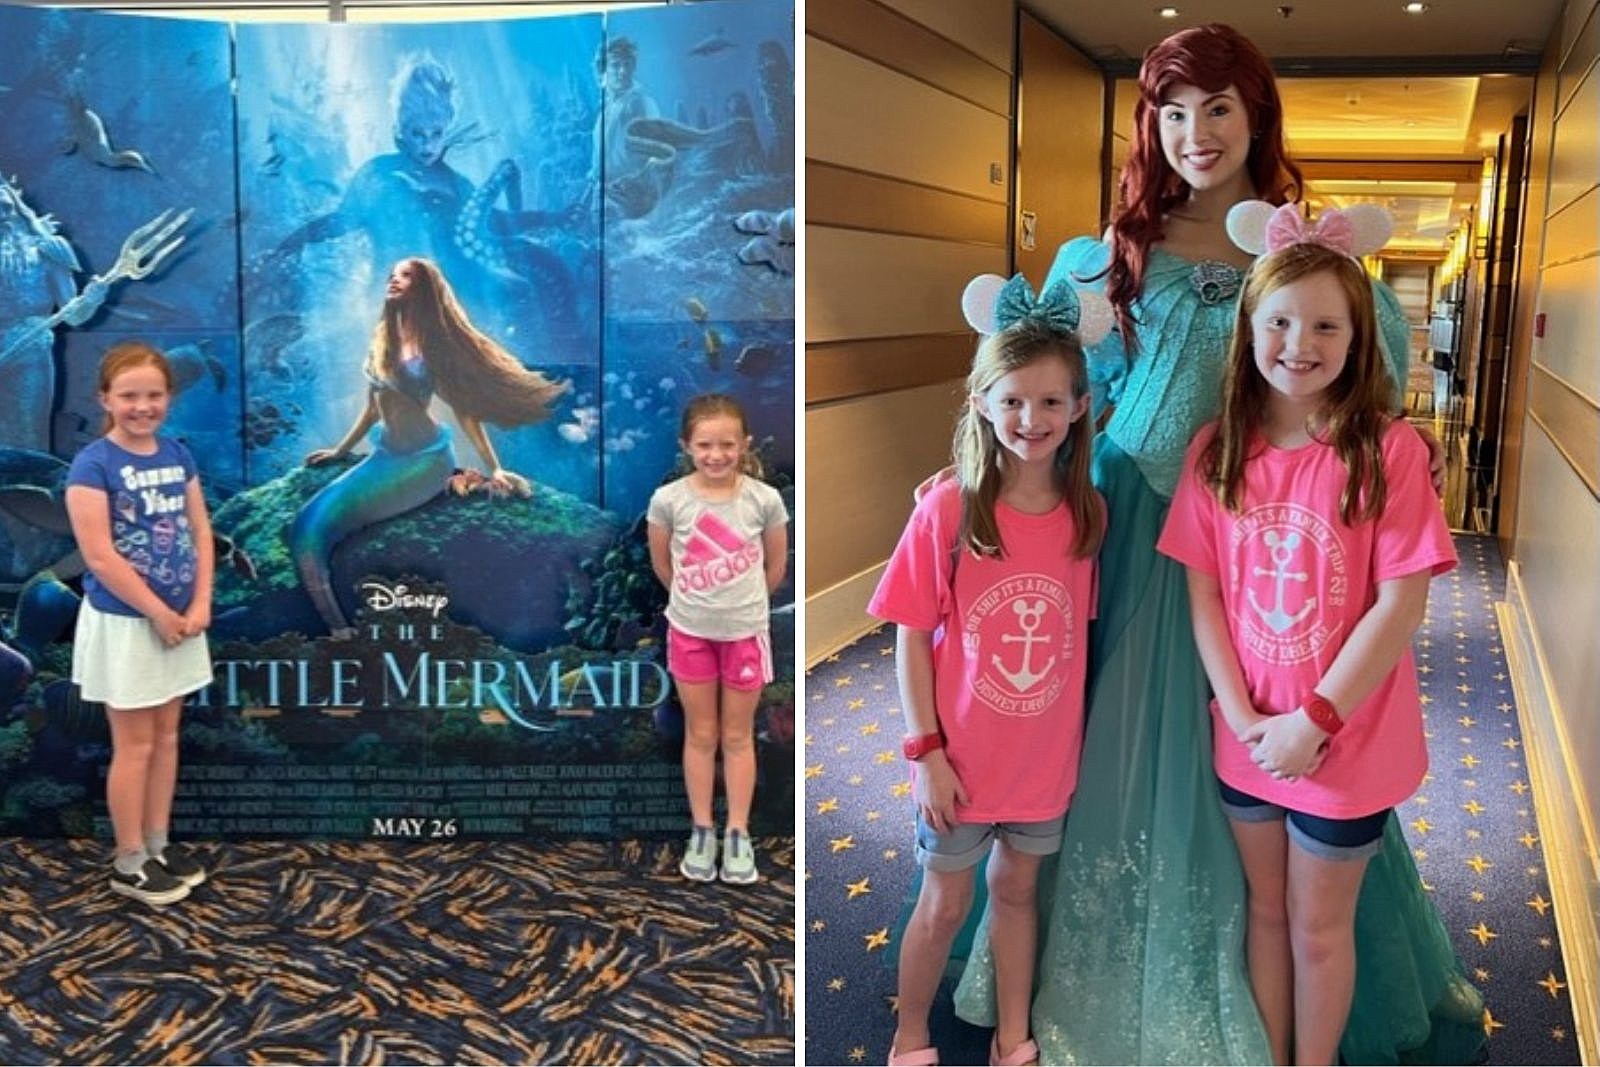 Illinois Meaningful Connection to New Little Mermaid Movie pic